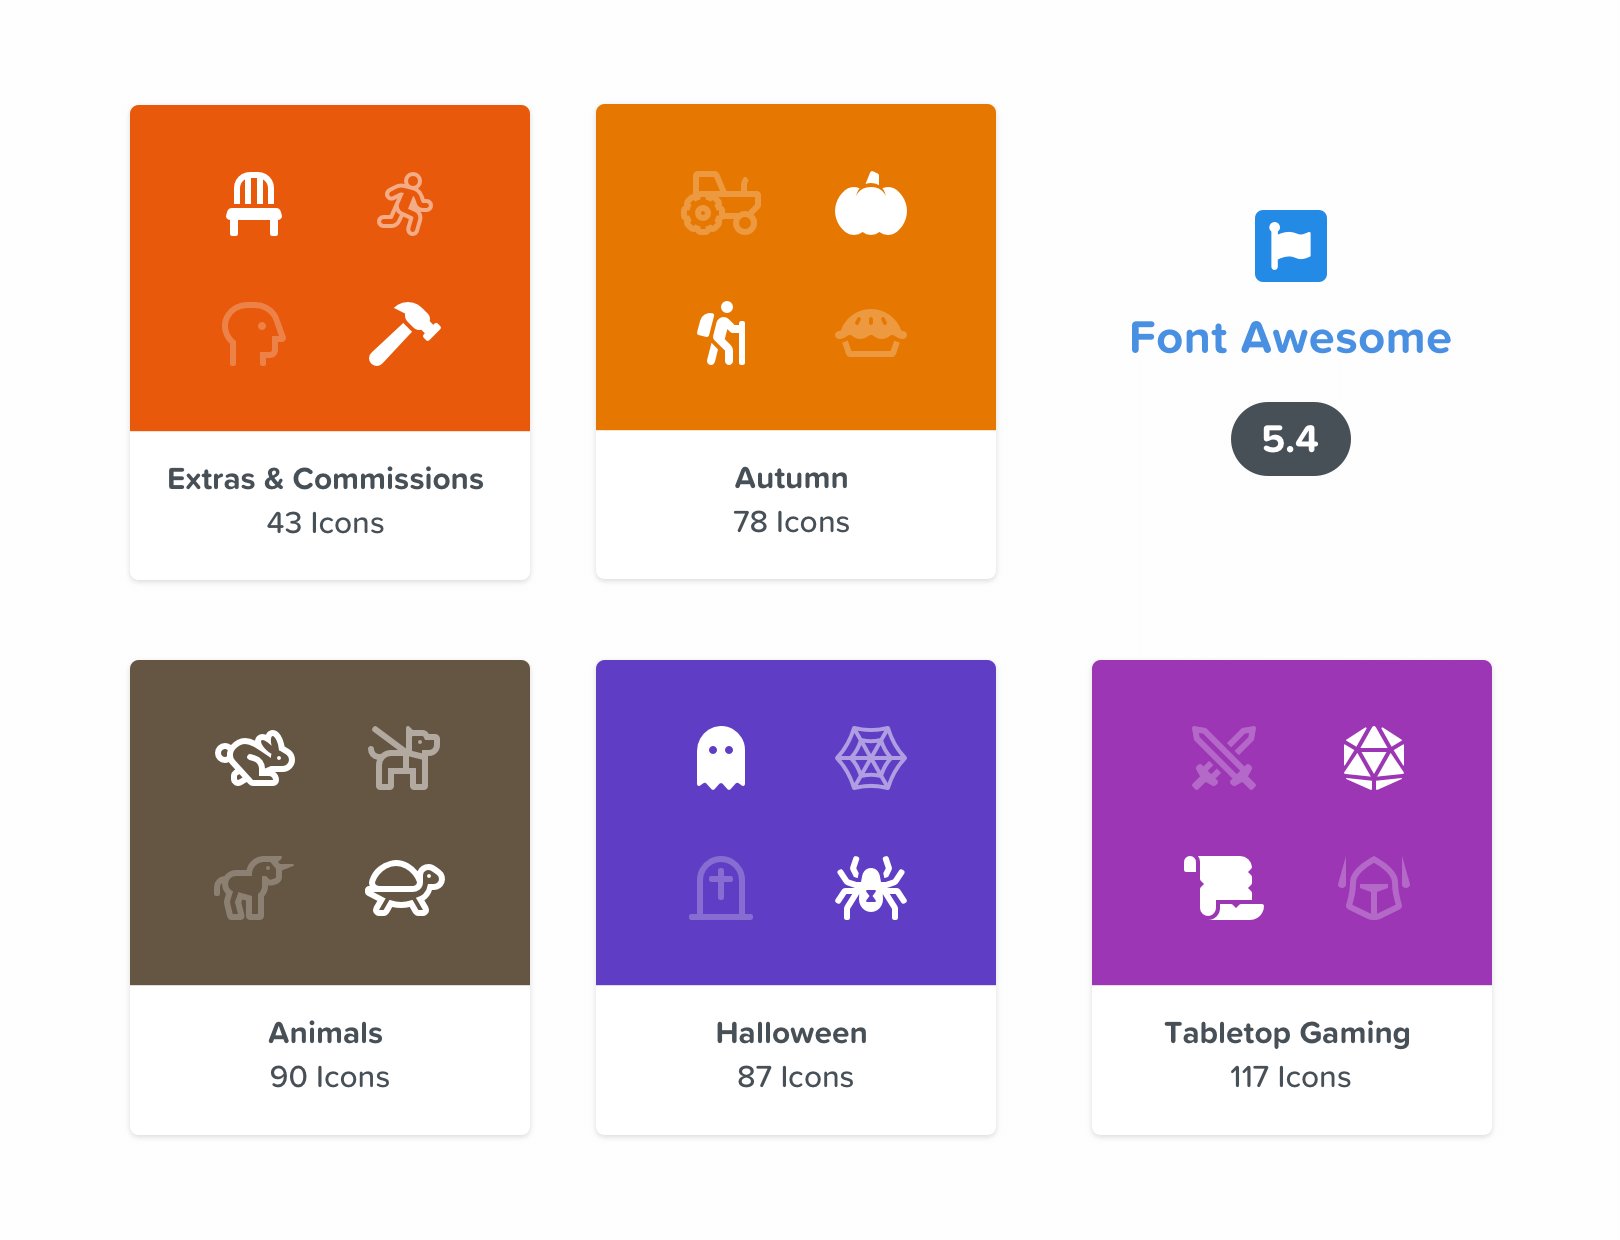 See All the Font Awesome Icon Categories